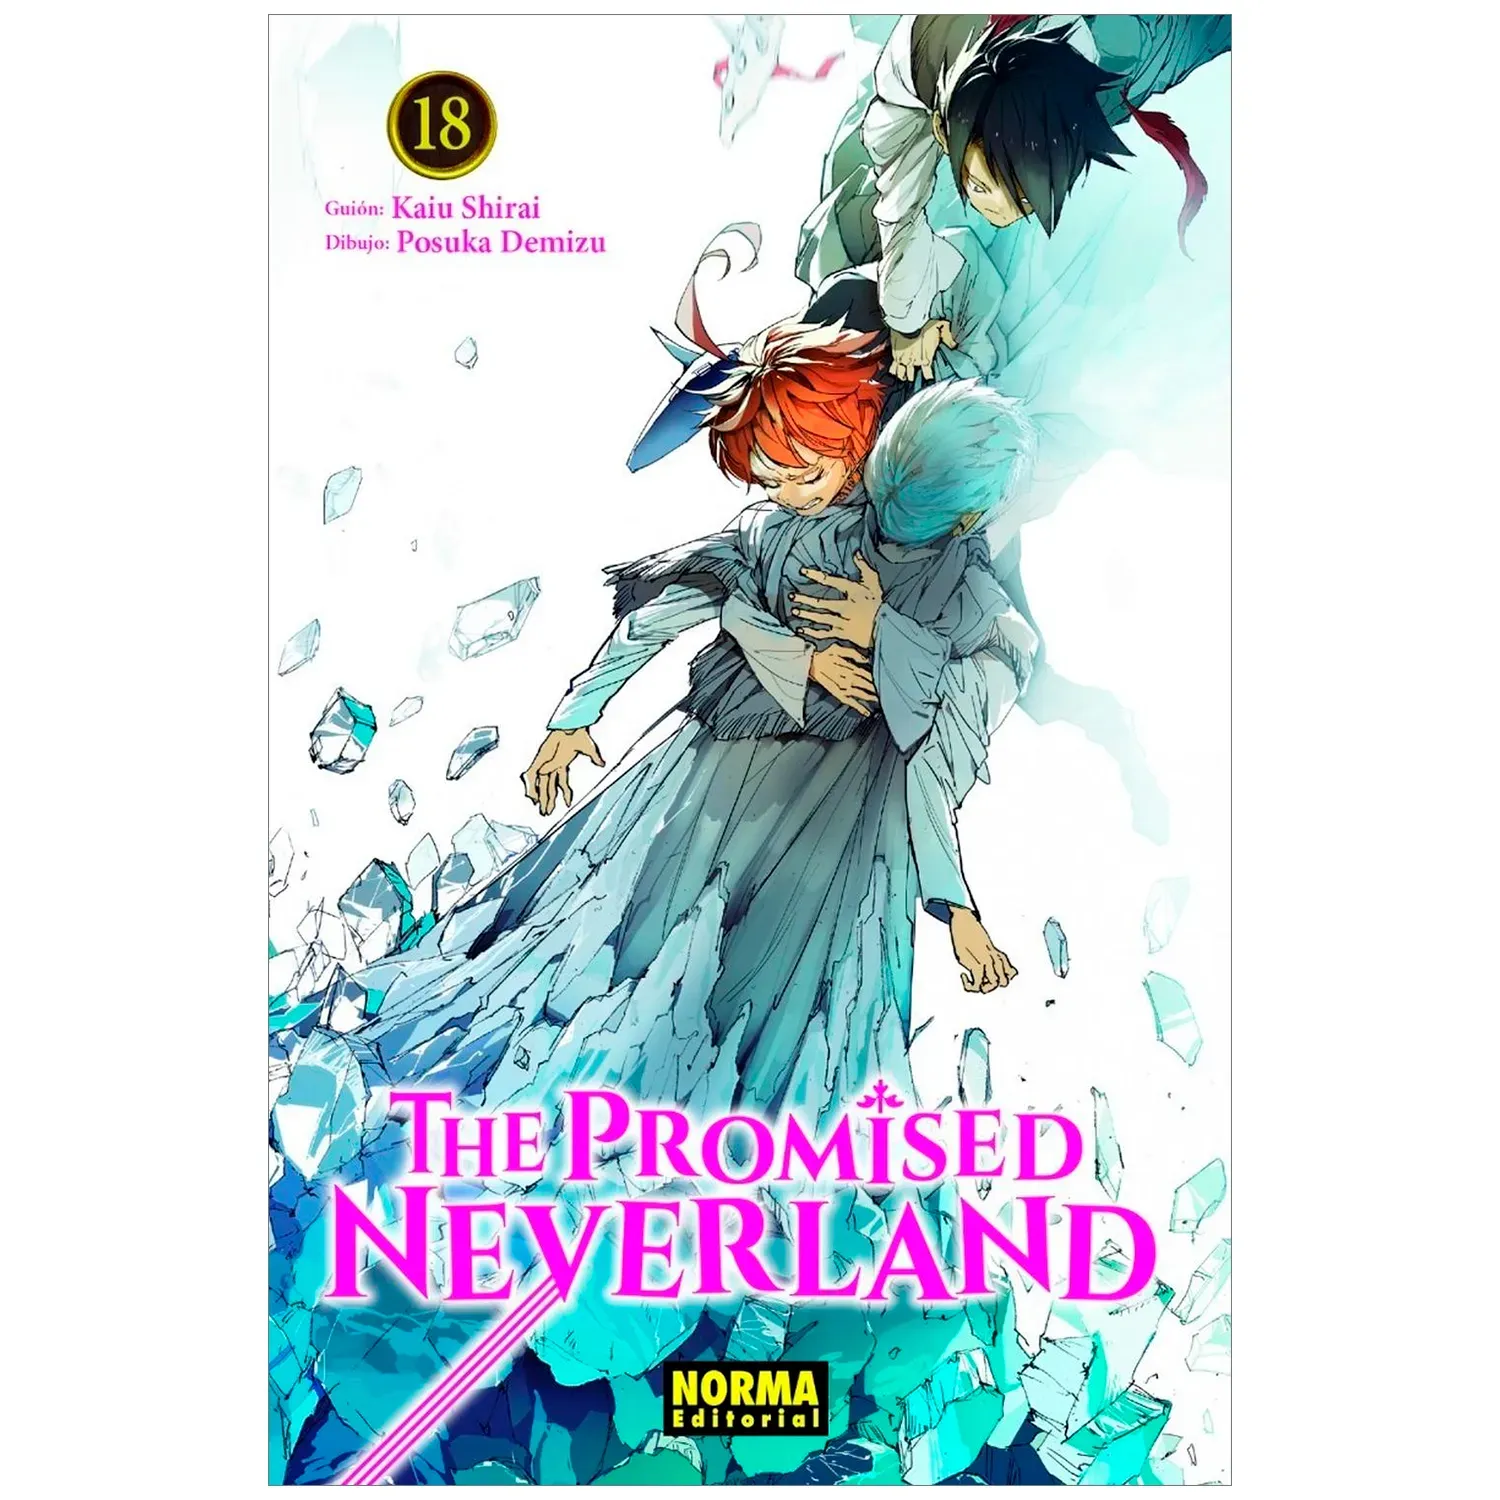 The Promised Neverland No. 18